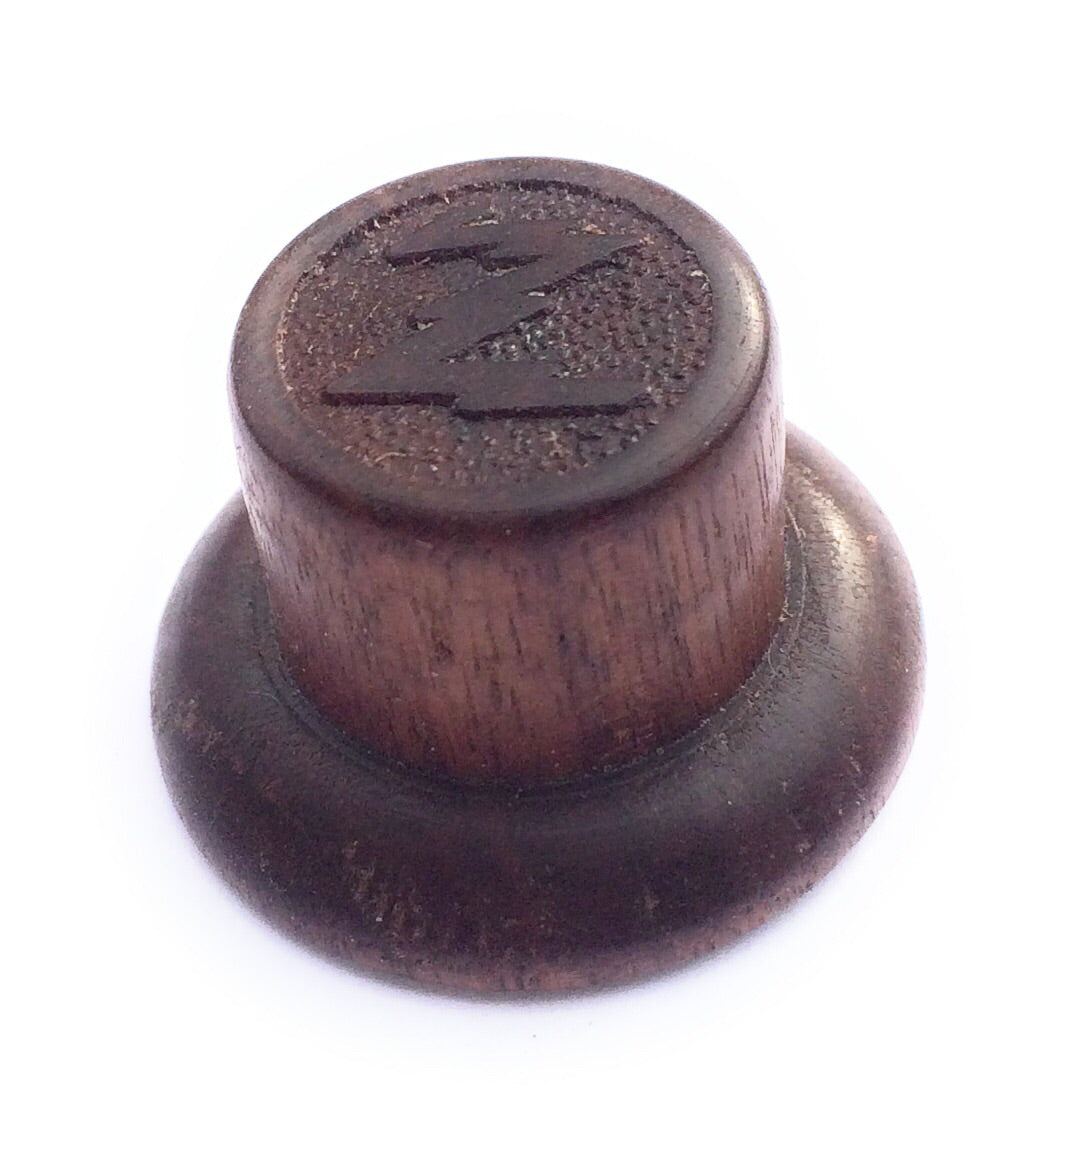 Small Solid Wood Hand Made Zenith Knob - Antique Radio Repair